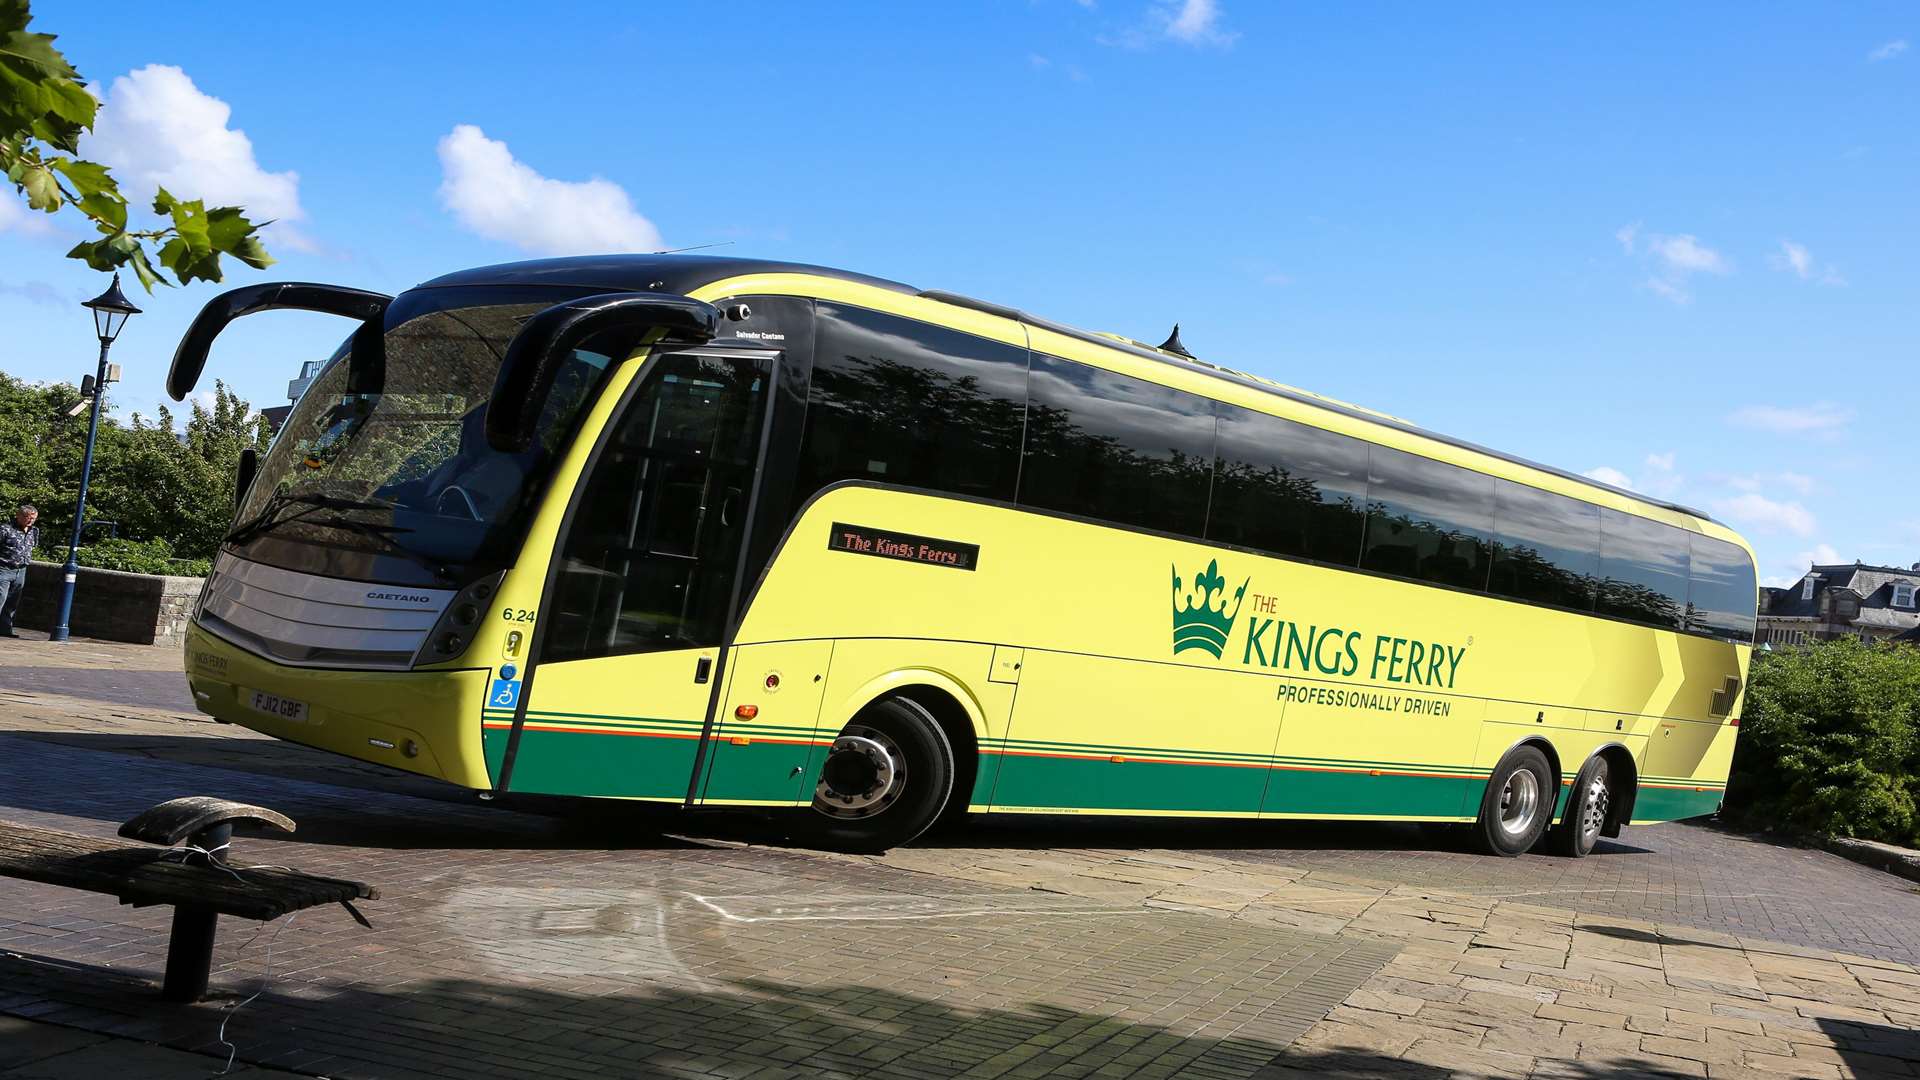 Gillingham-based The Kings Ferry runs commuter services from Kent to London